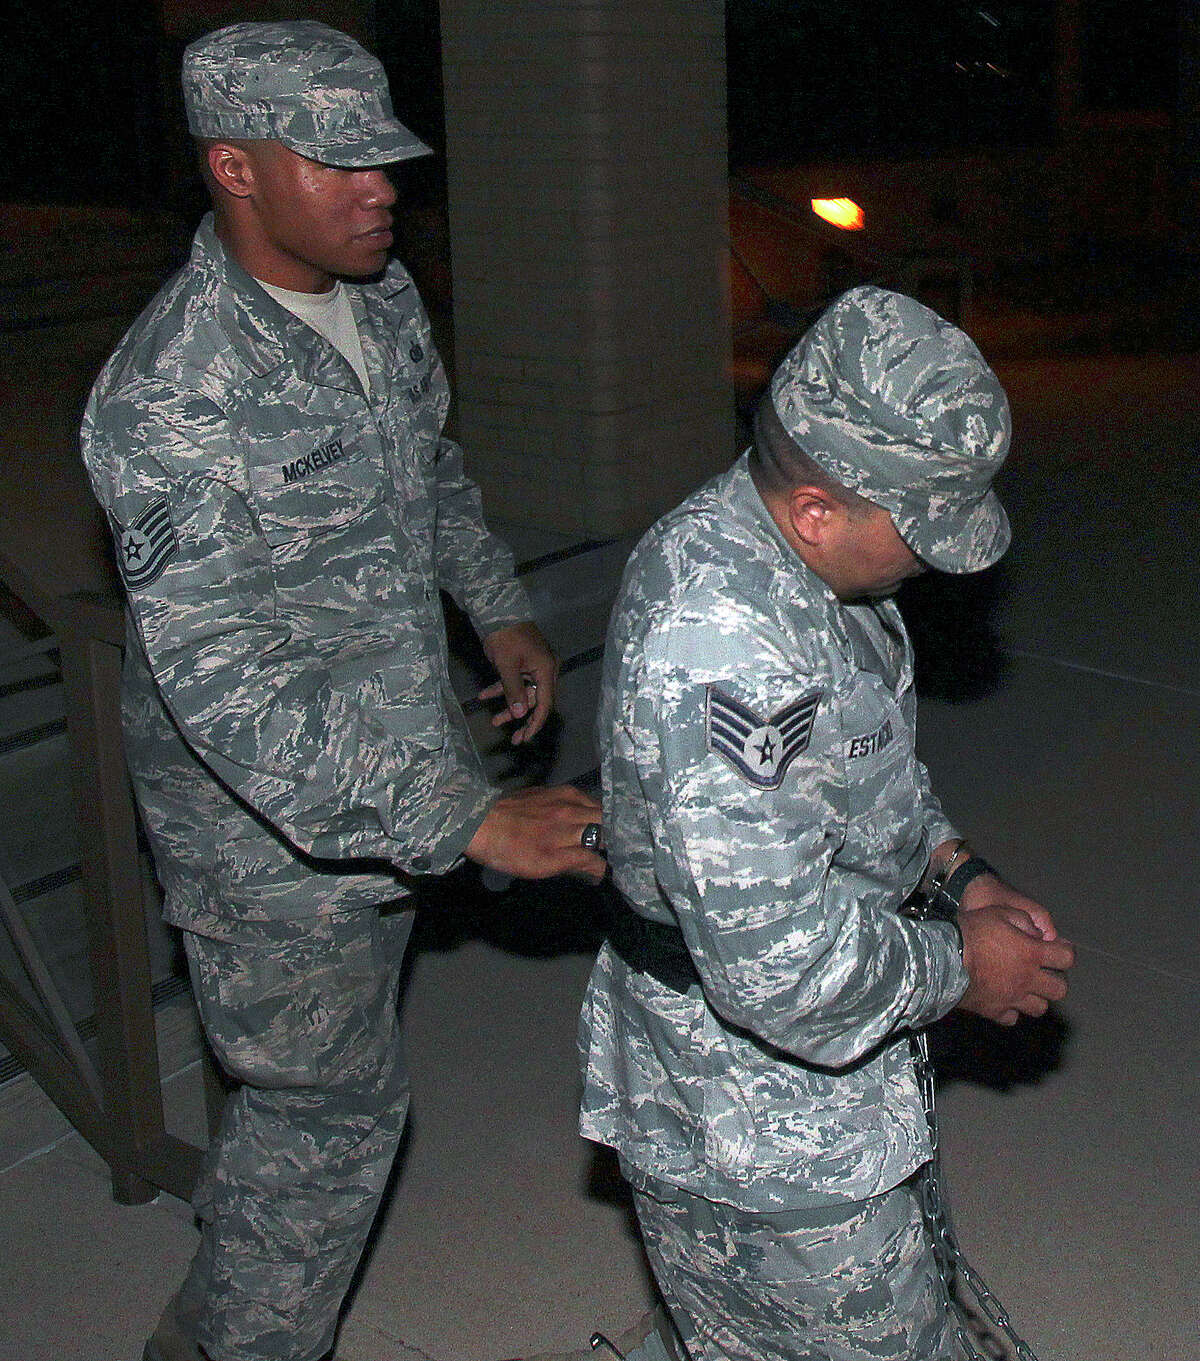 Staff Sgt. Kwinton Estacio is led away from the 37th Training Wing Headquarters after sentencing in his trial at Joint Base San Antonio-Lackland on September 12, 2012.